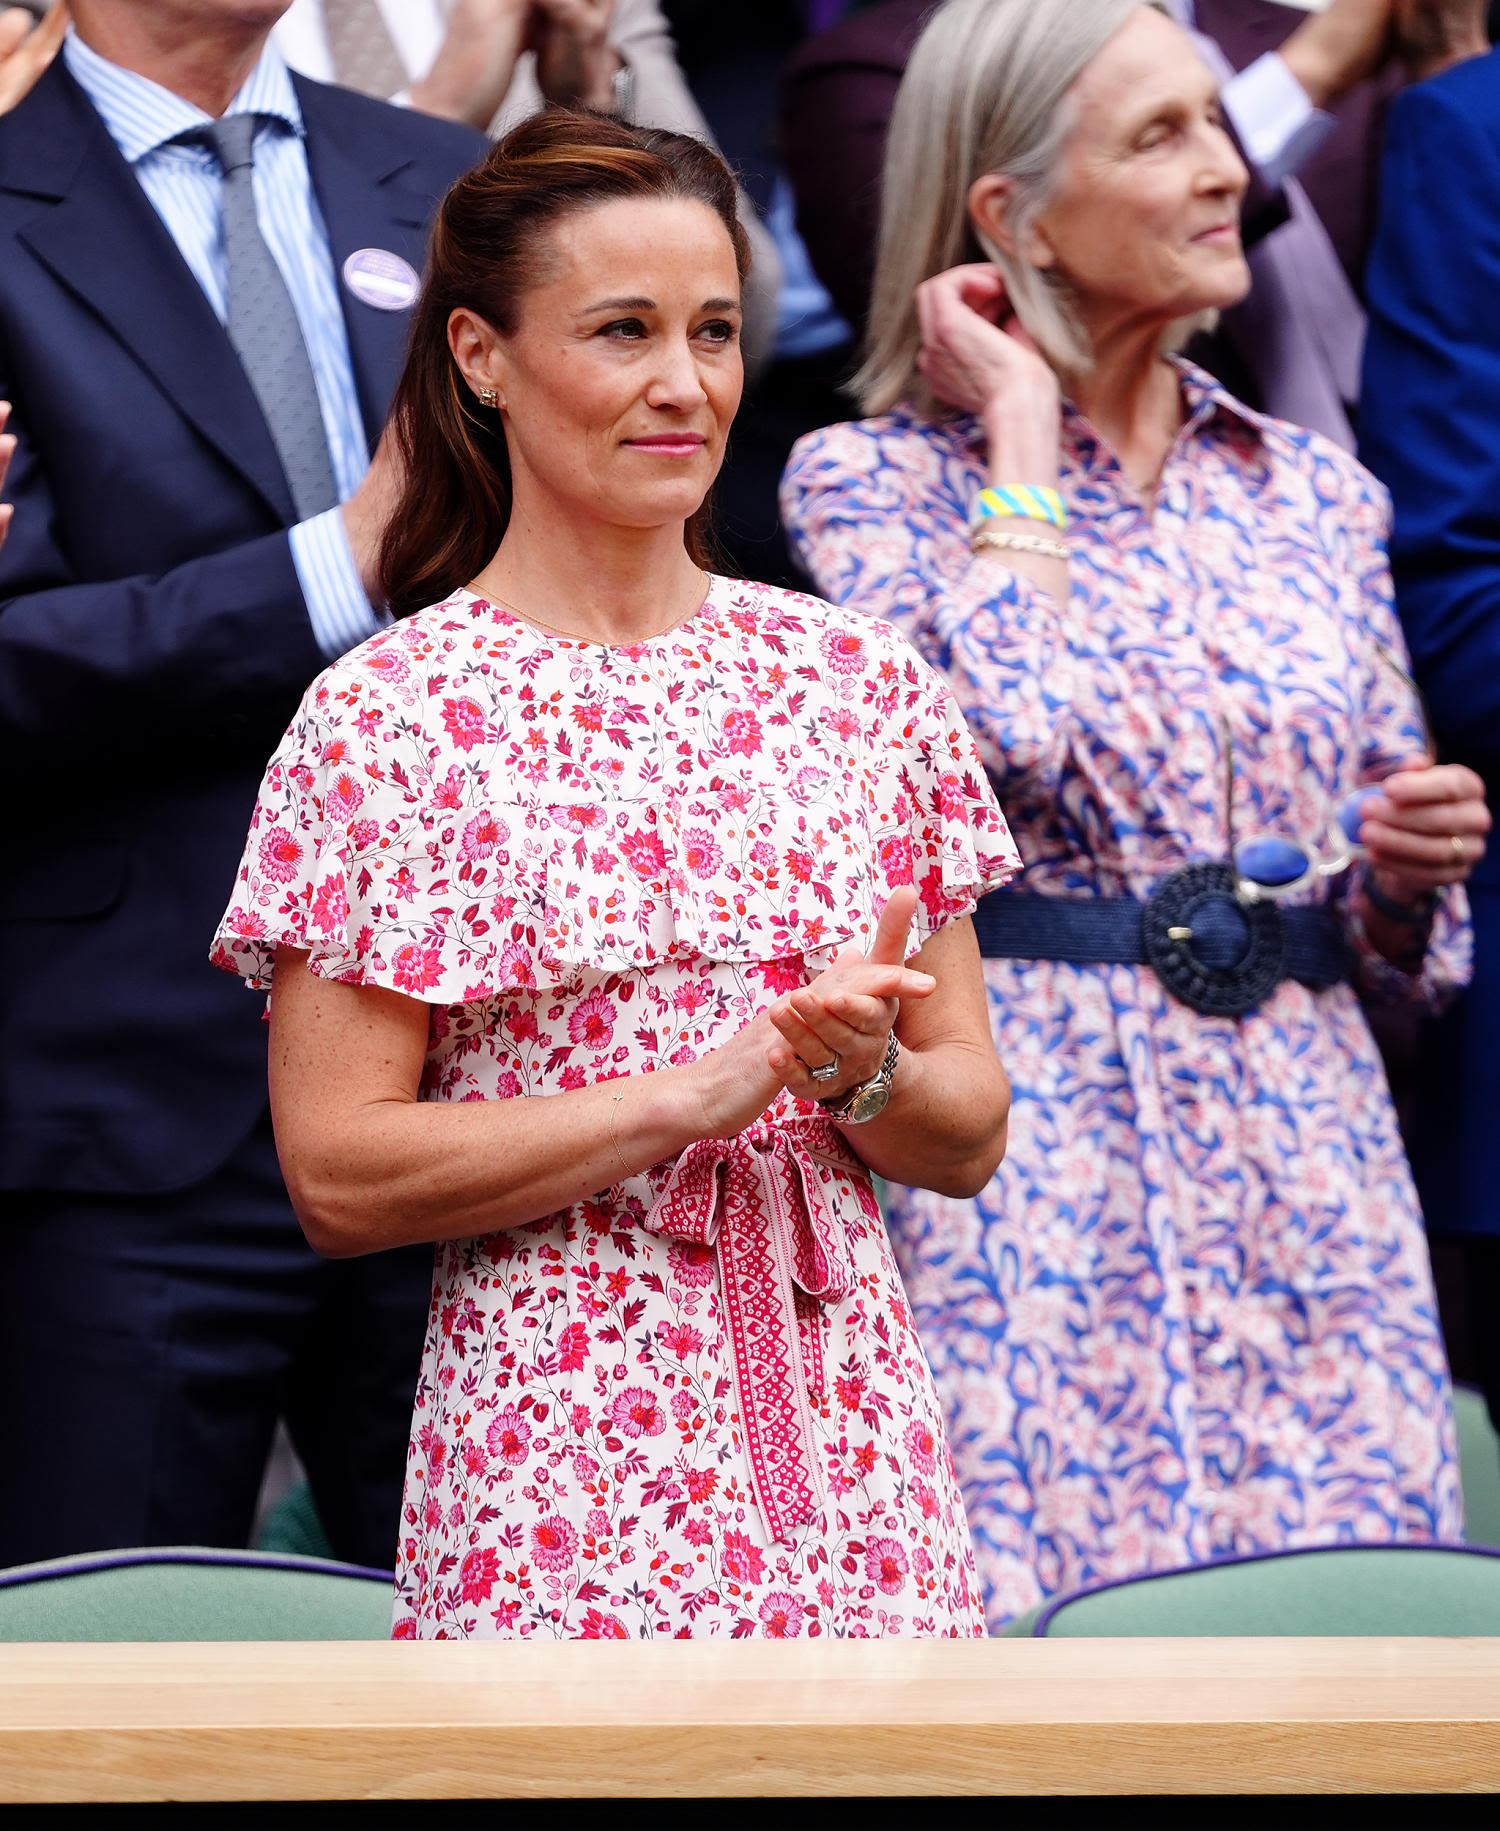 Pippa Middleton makes rare public appearance with sister Kate at Wimbledon